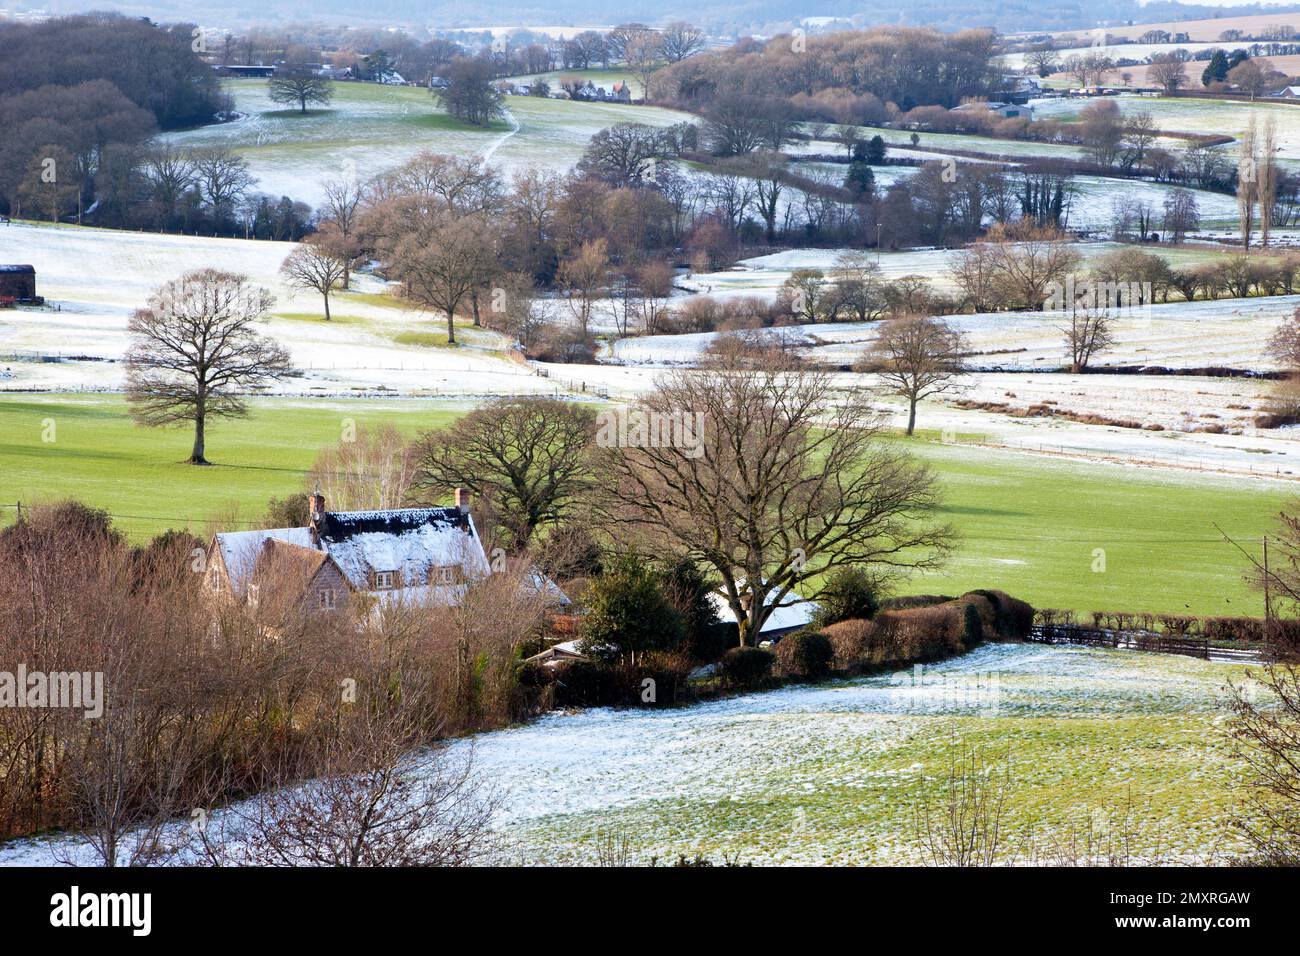 A winter view of the landscape near the village of Sutton Mandeville in Wiltshire. Stock Photo